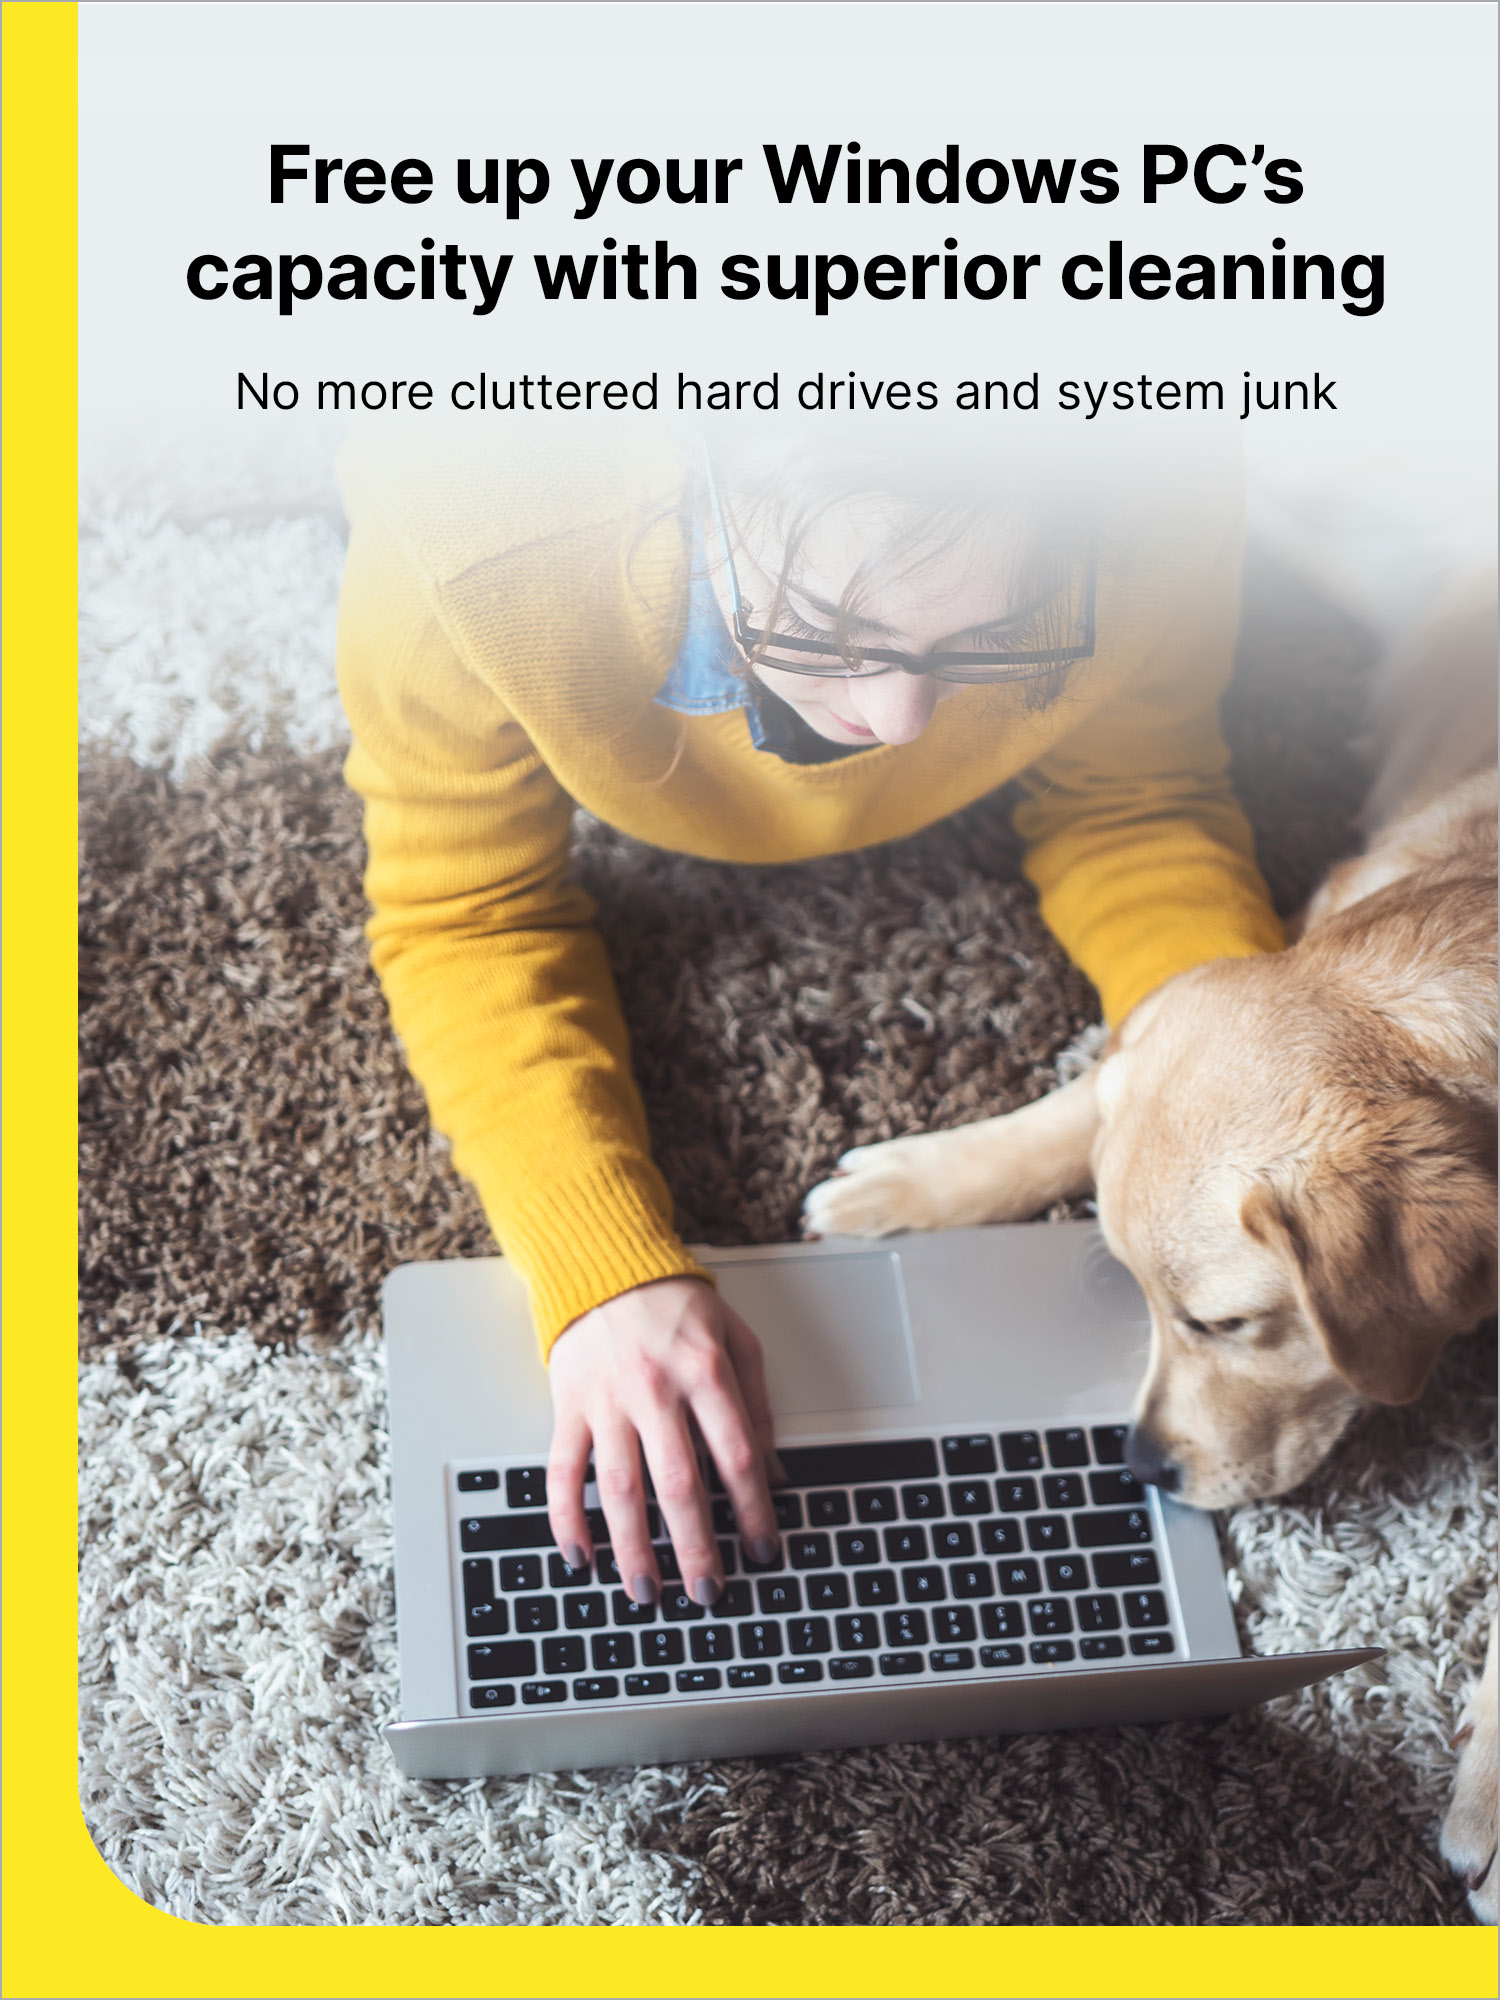 Norton Utilities Ultimate, Cleans and speeds up your PC, 1 Year Subscription, Windows PC only, for up to 10 PCs [Digital Download] - image 3 of 6